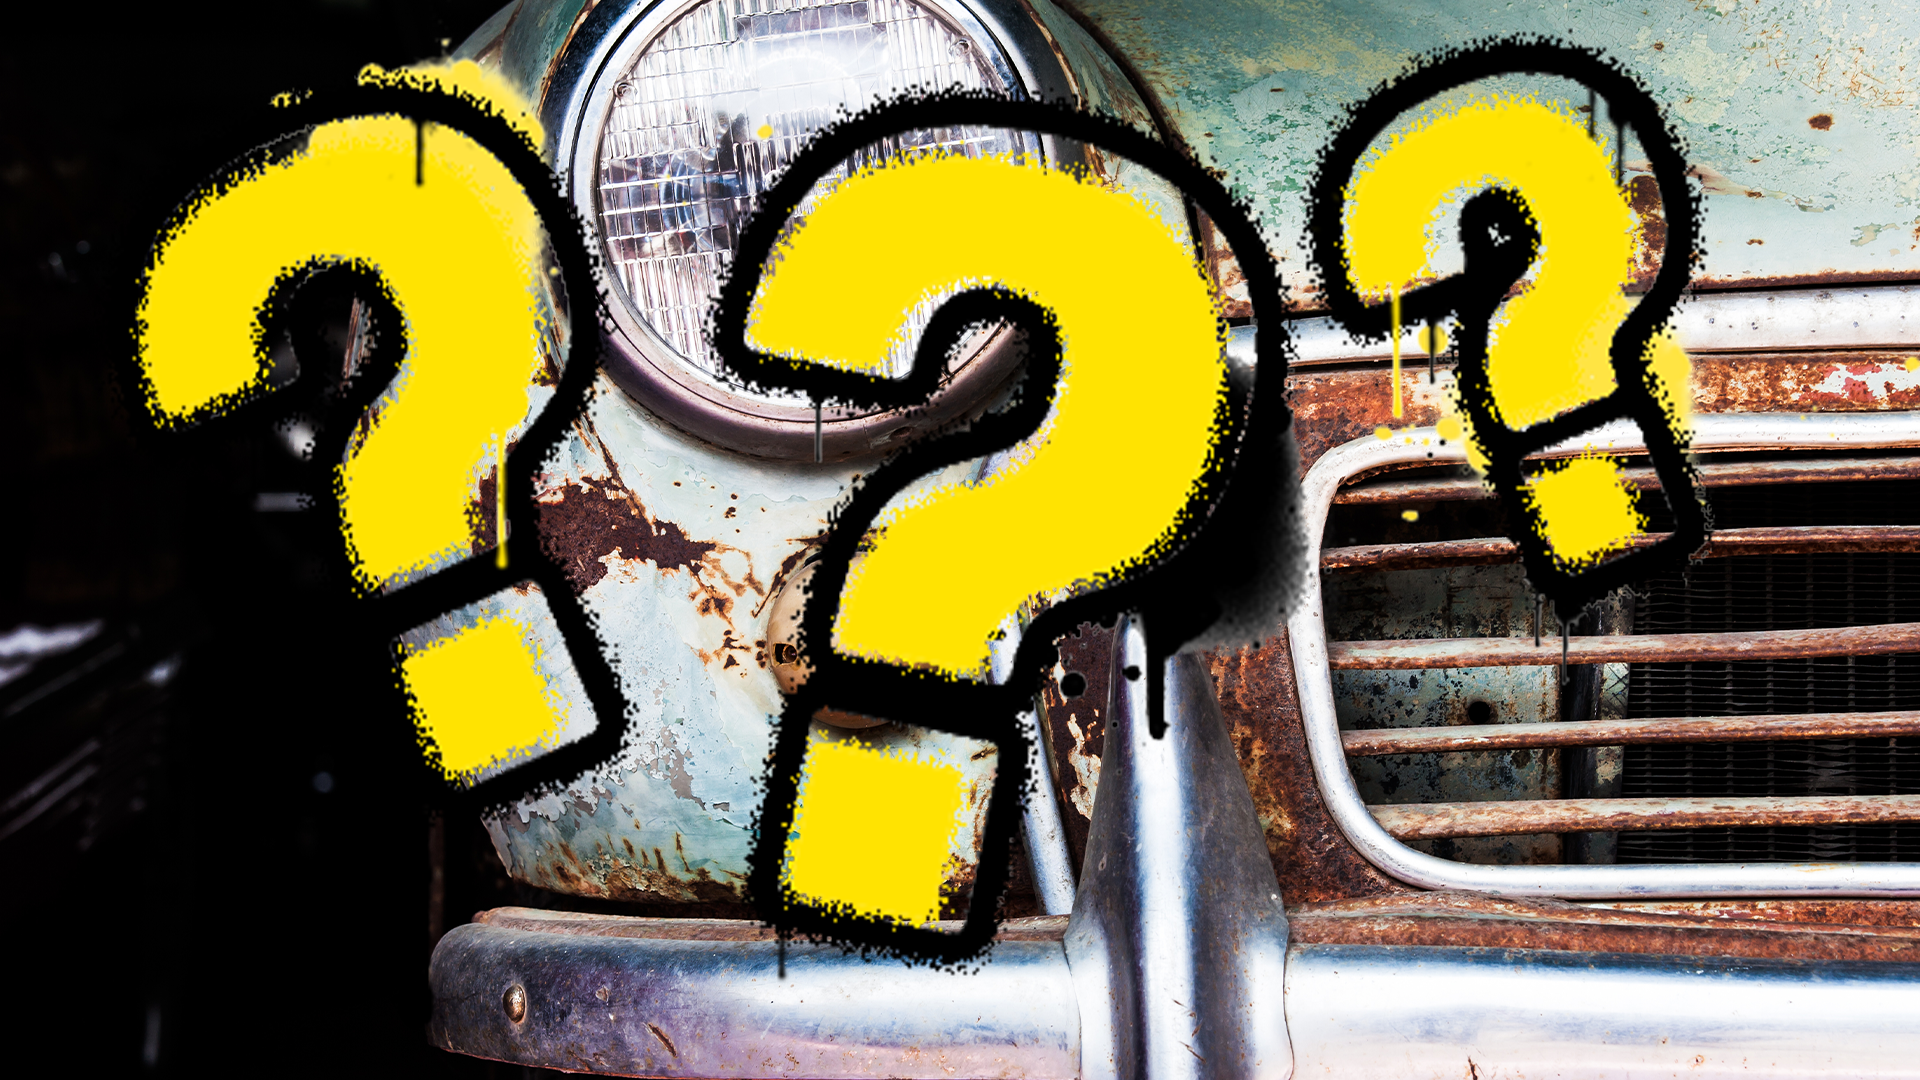 Car and question marks